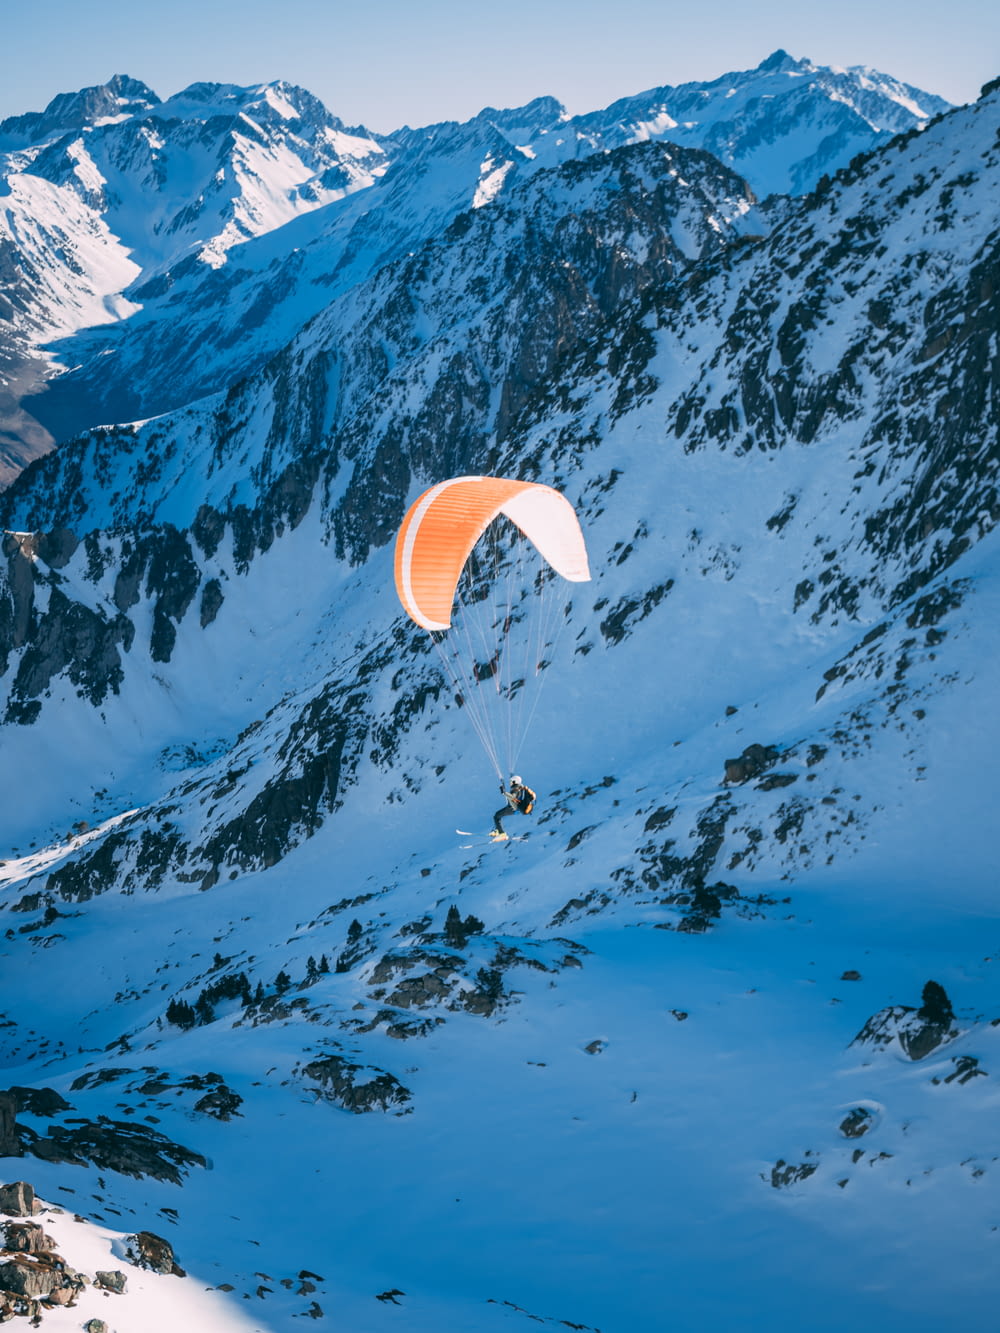 person riding parachute above glacier mountains and snowfield